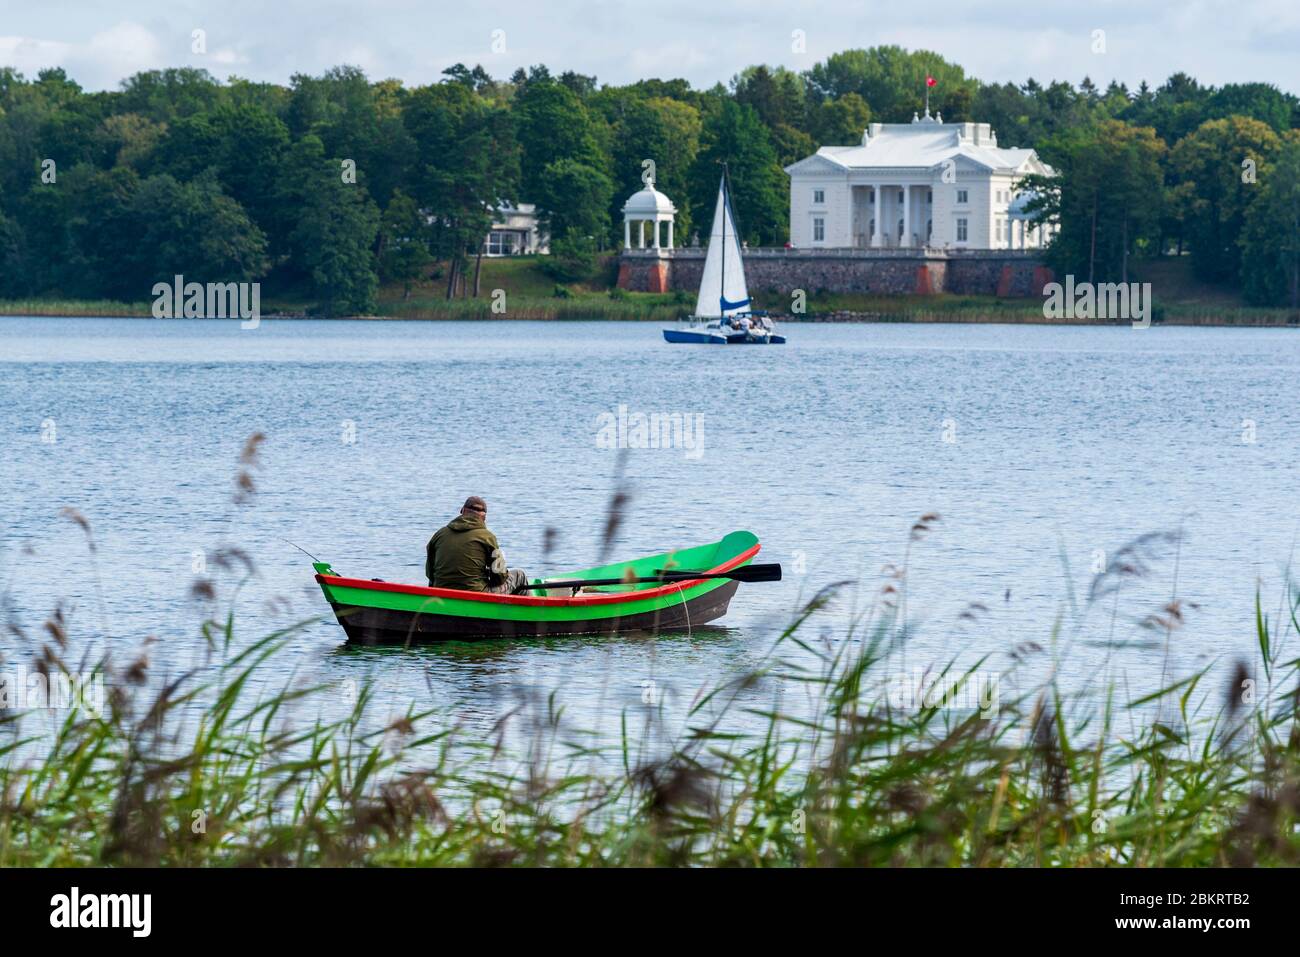 Lithuania (Baltic States), Vilnius County, Trakai National Historic Park, Uzutrakis Manor built 1902 and the residential manor of the Tyszkiewicz family, Lake Galve, rowing boat Stock Photo